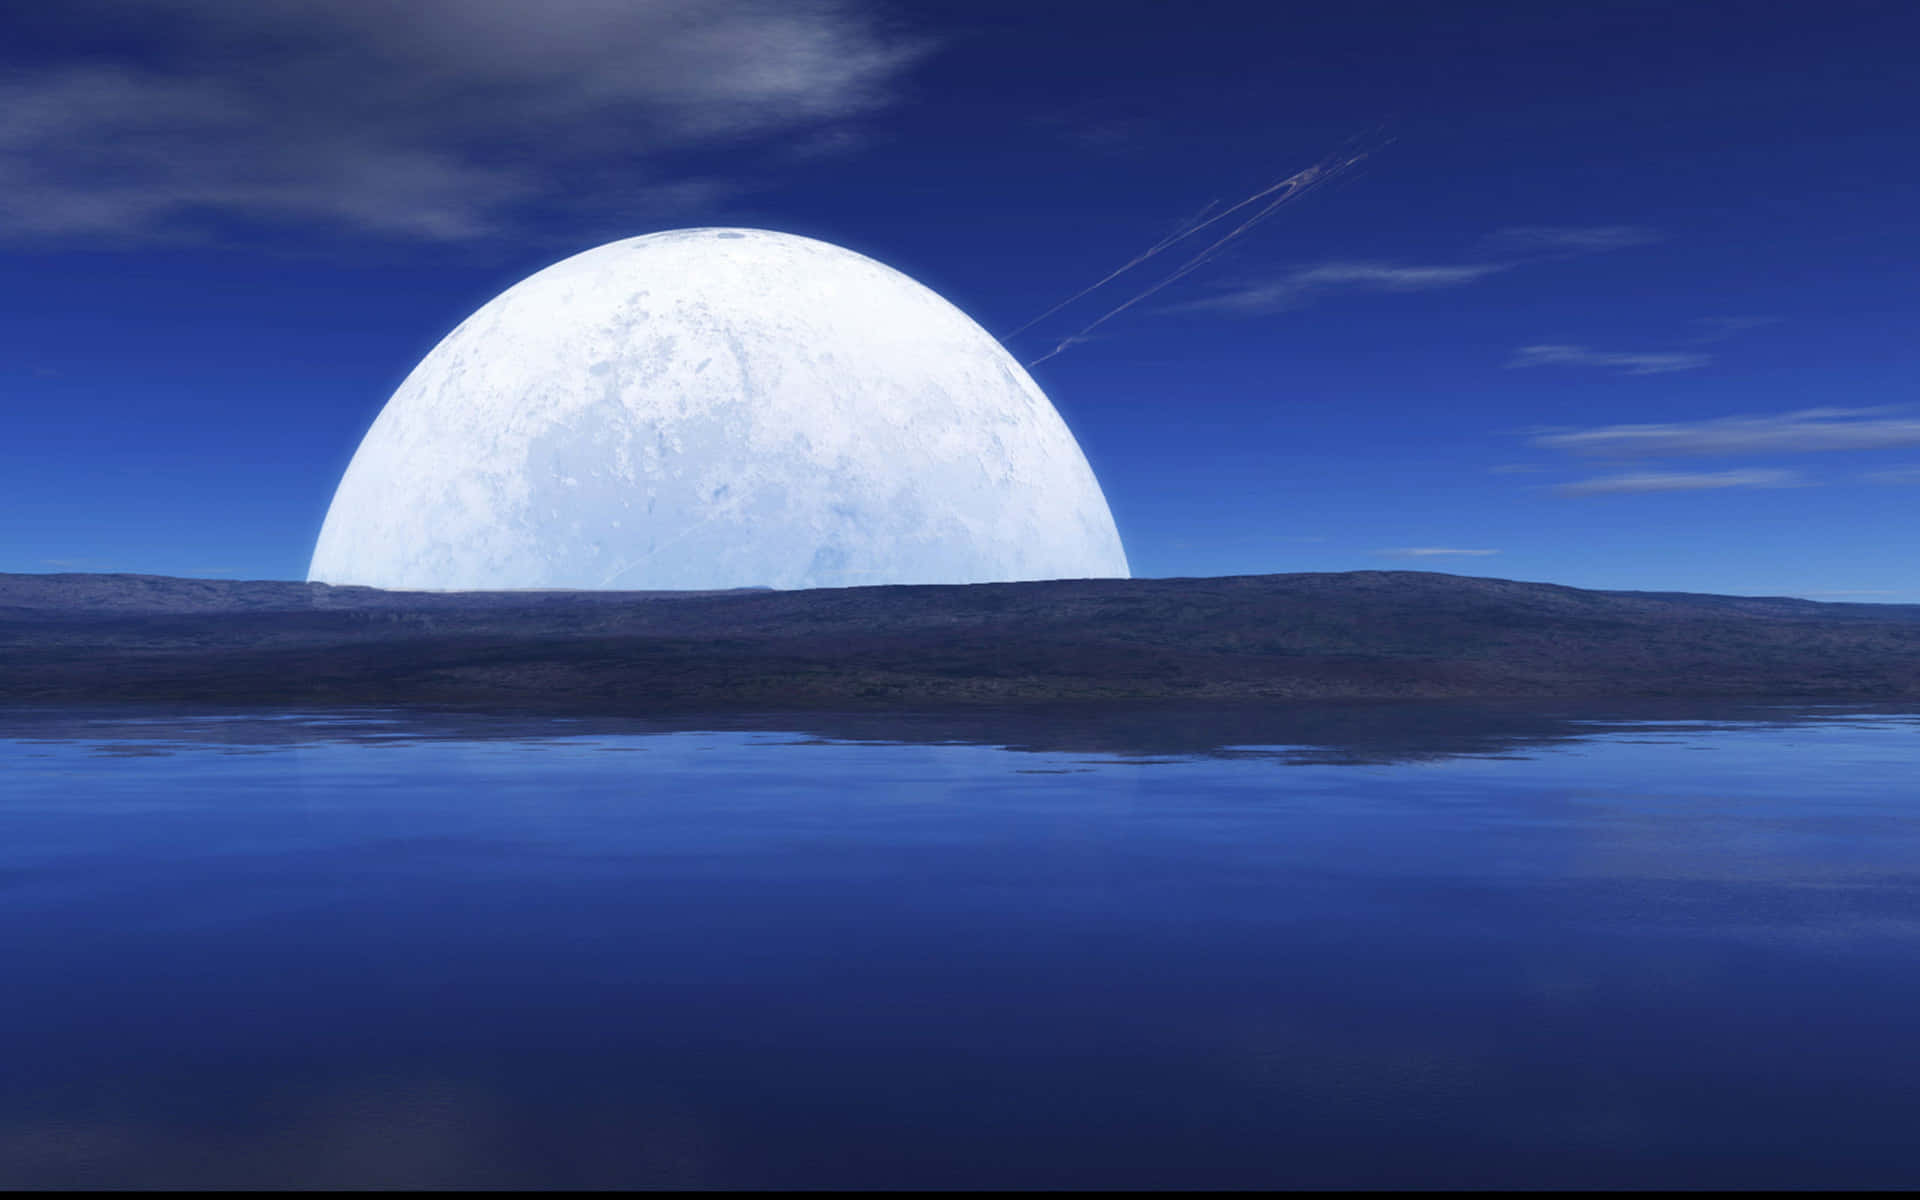 Giant_ Moon_ Rising_ Over_ Water Wallpaper